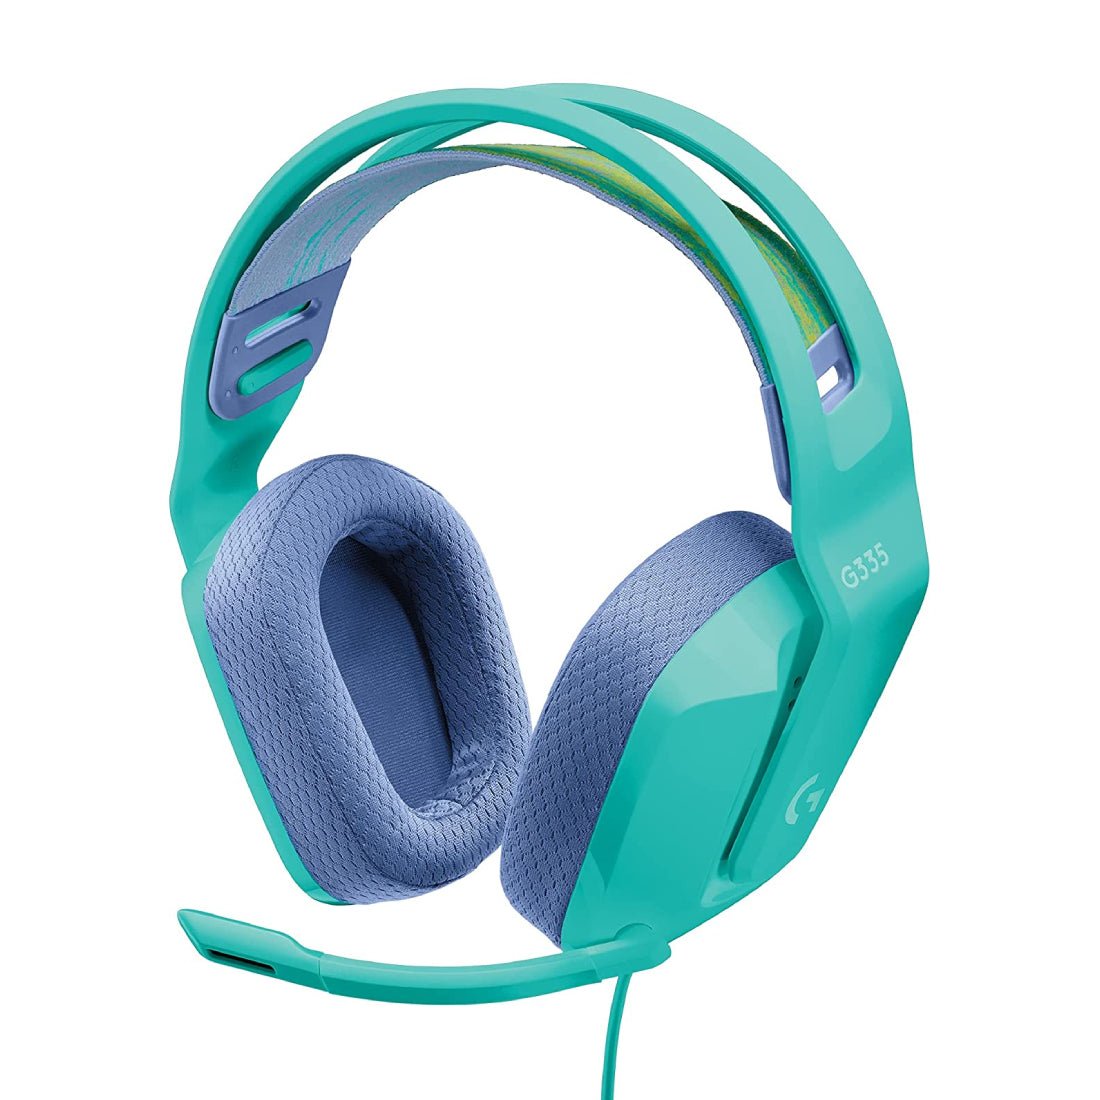 Logitech G335 Wired Gaming Headset - Mint - Store 974 | ستور ٩٧٤